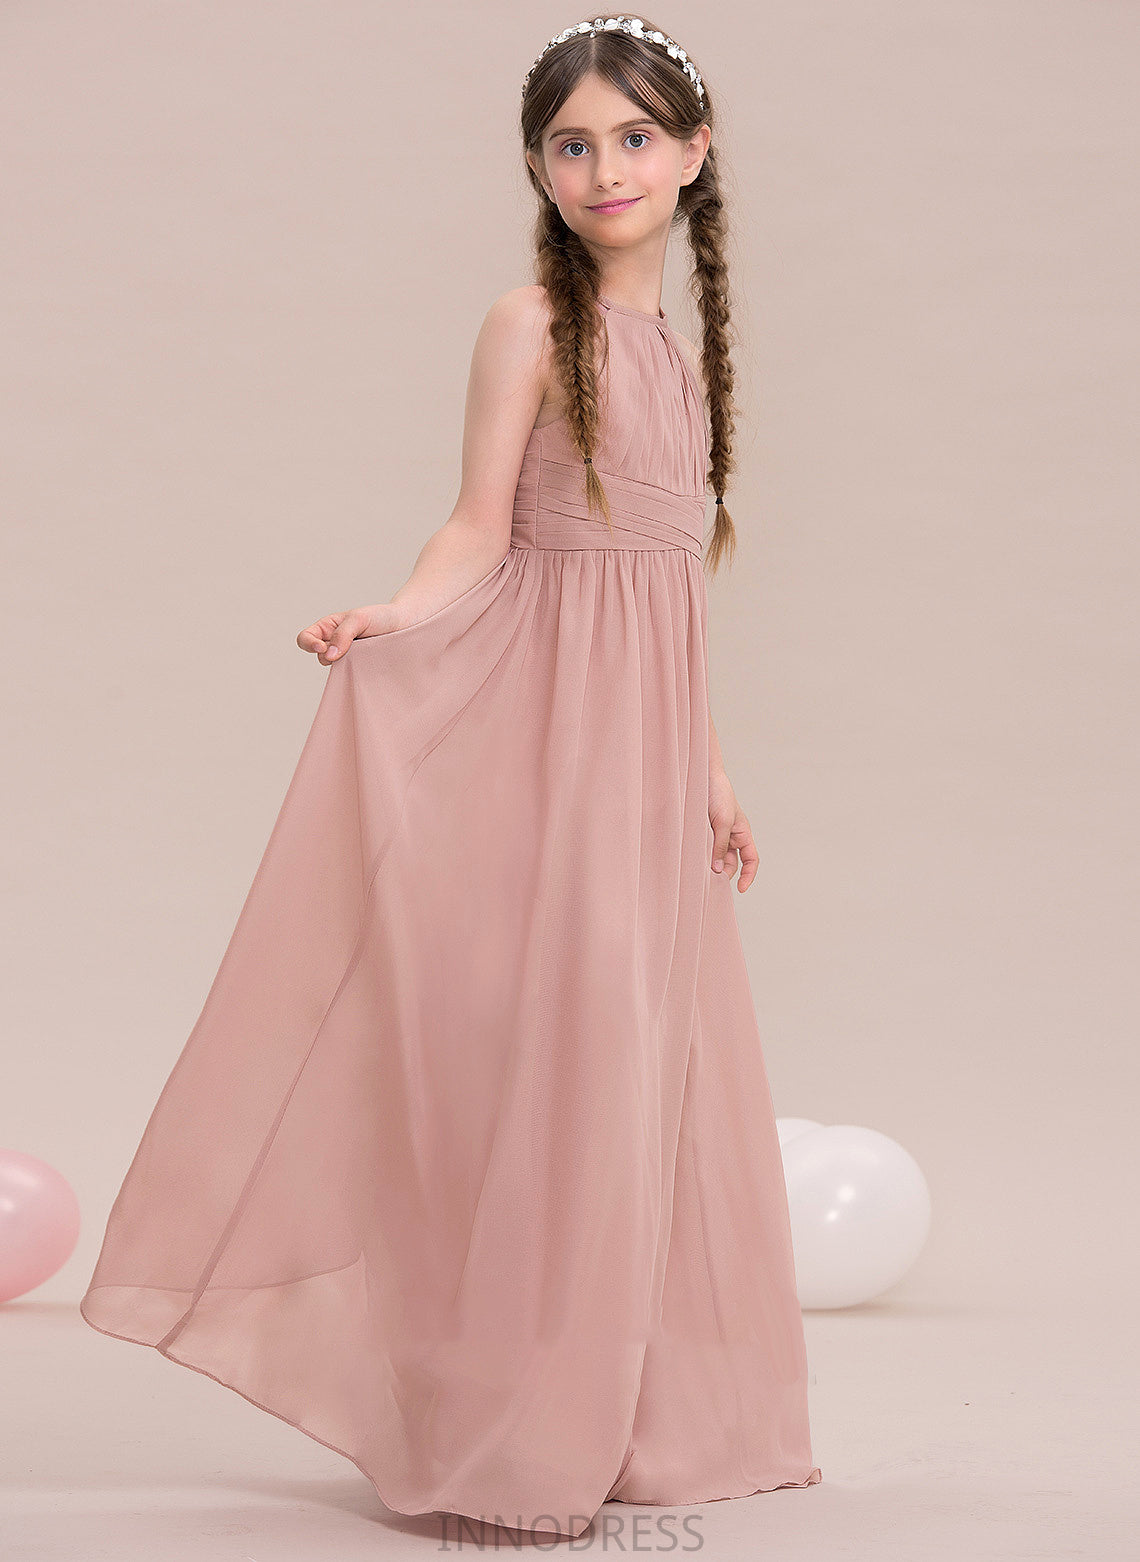 Chiffon With Ruffle Campbell Scoop Floor-Length A-Line Junior Bridesmaid Dresses Neck